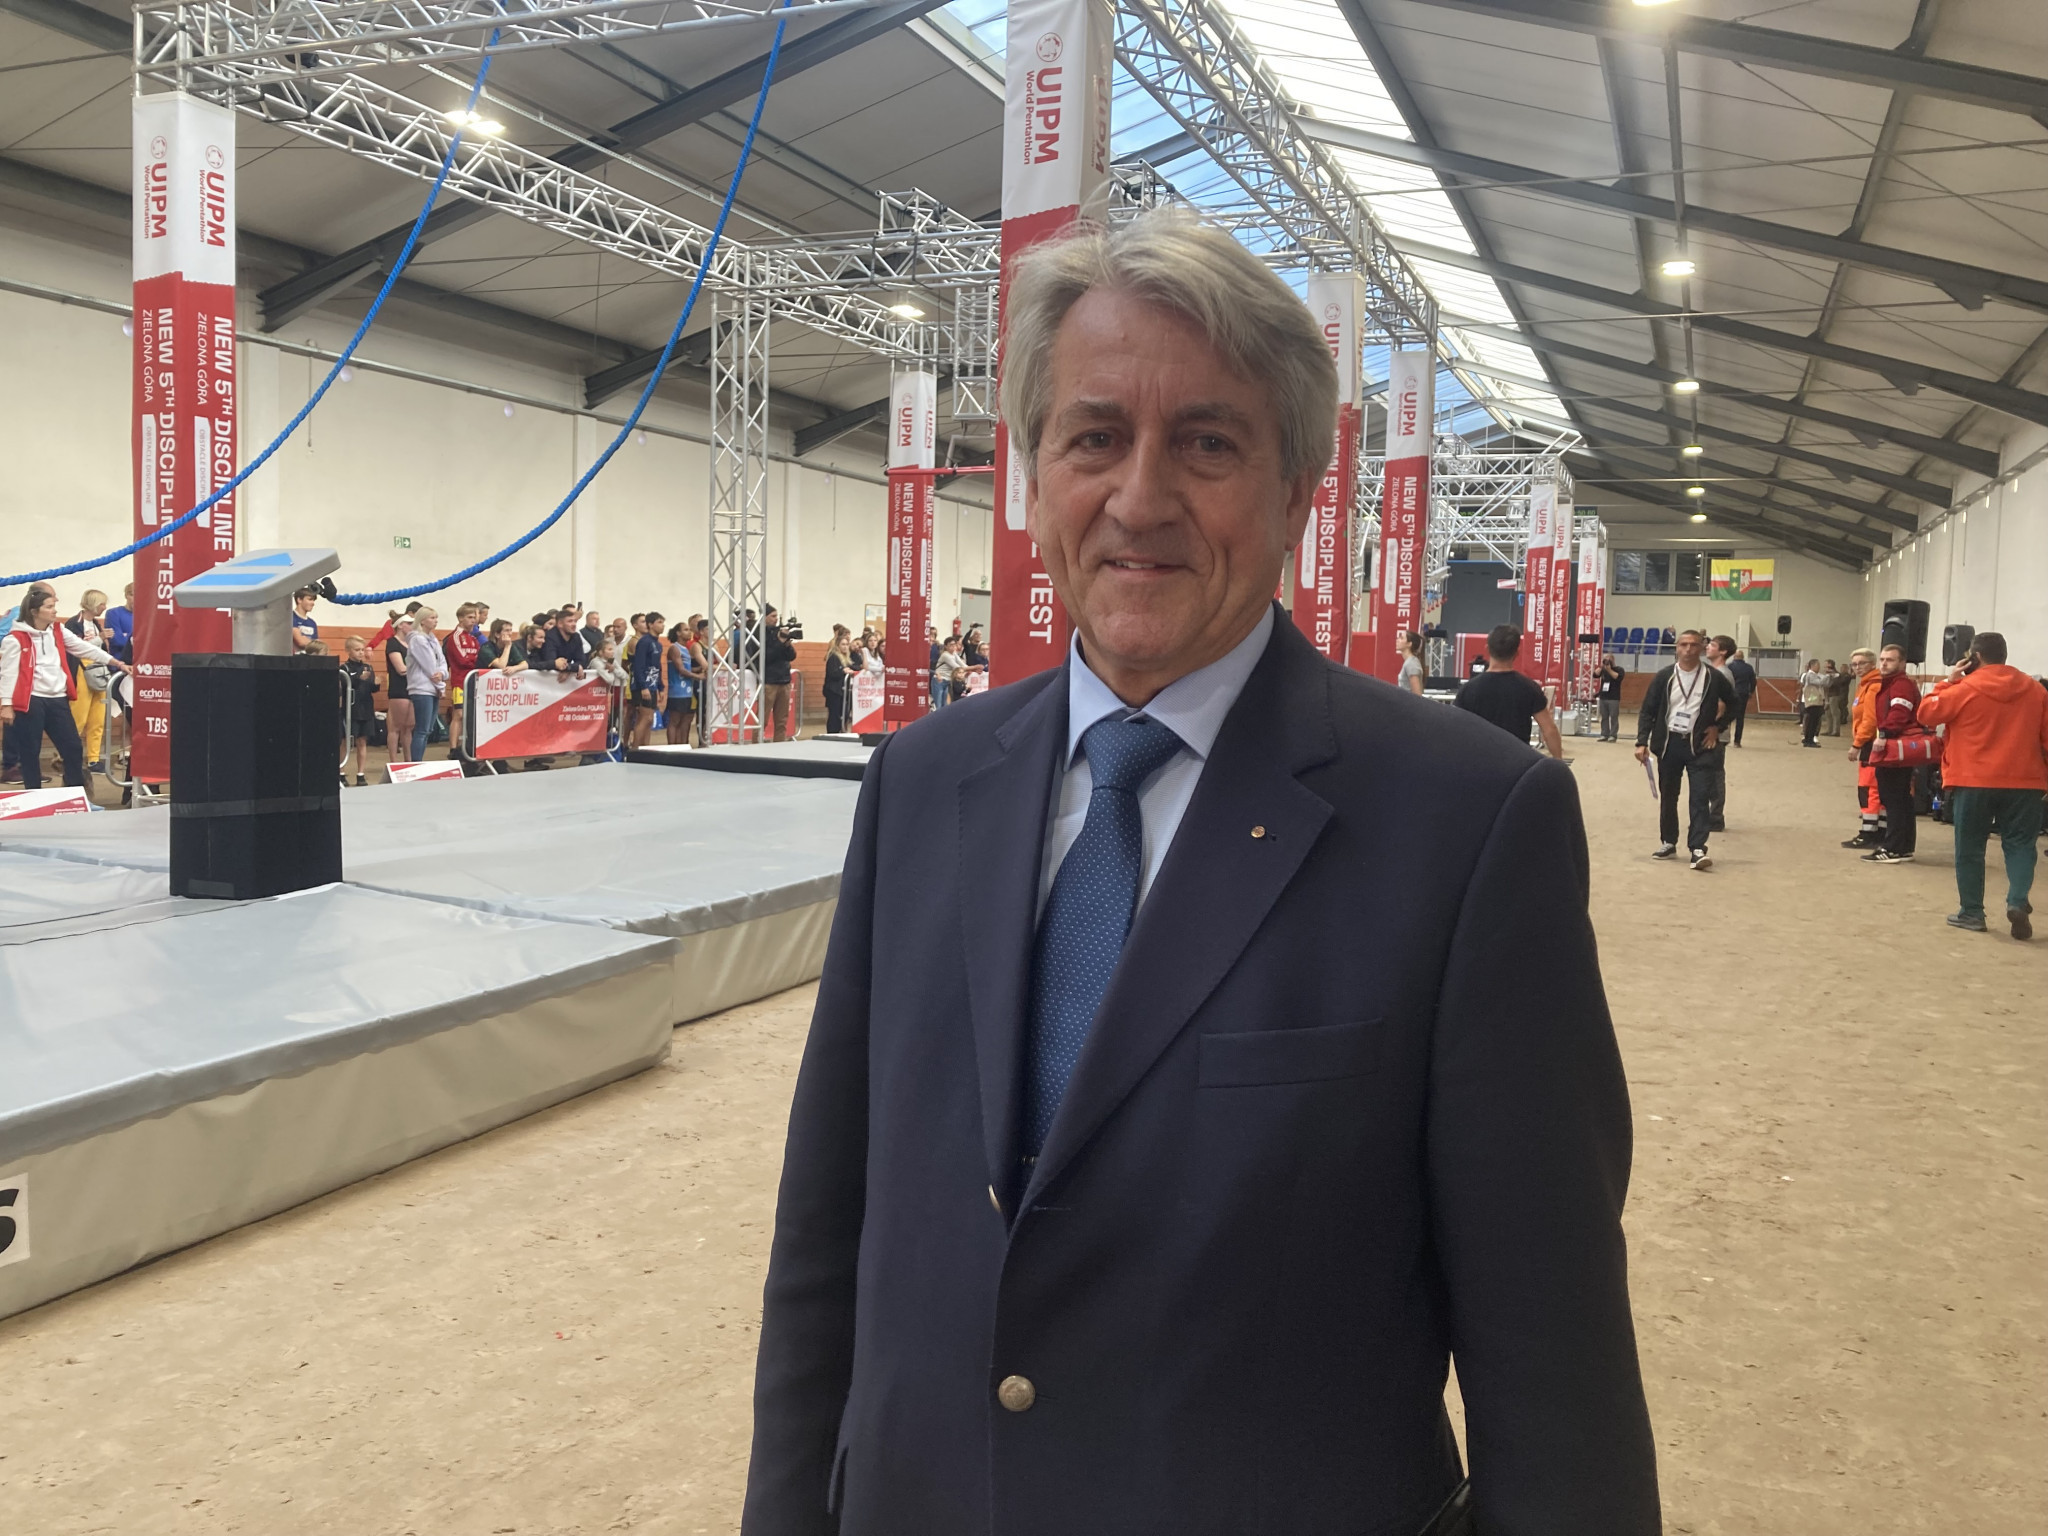 President Klaus Schormann was criticised in a motion of no confidence proposed for the UIPM Congress, with his record on developing the sport in Africa among the concerns expressed ©ITG